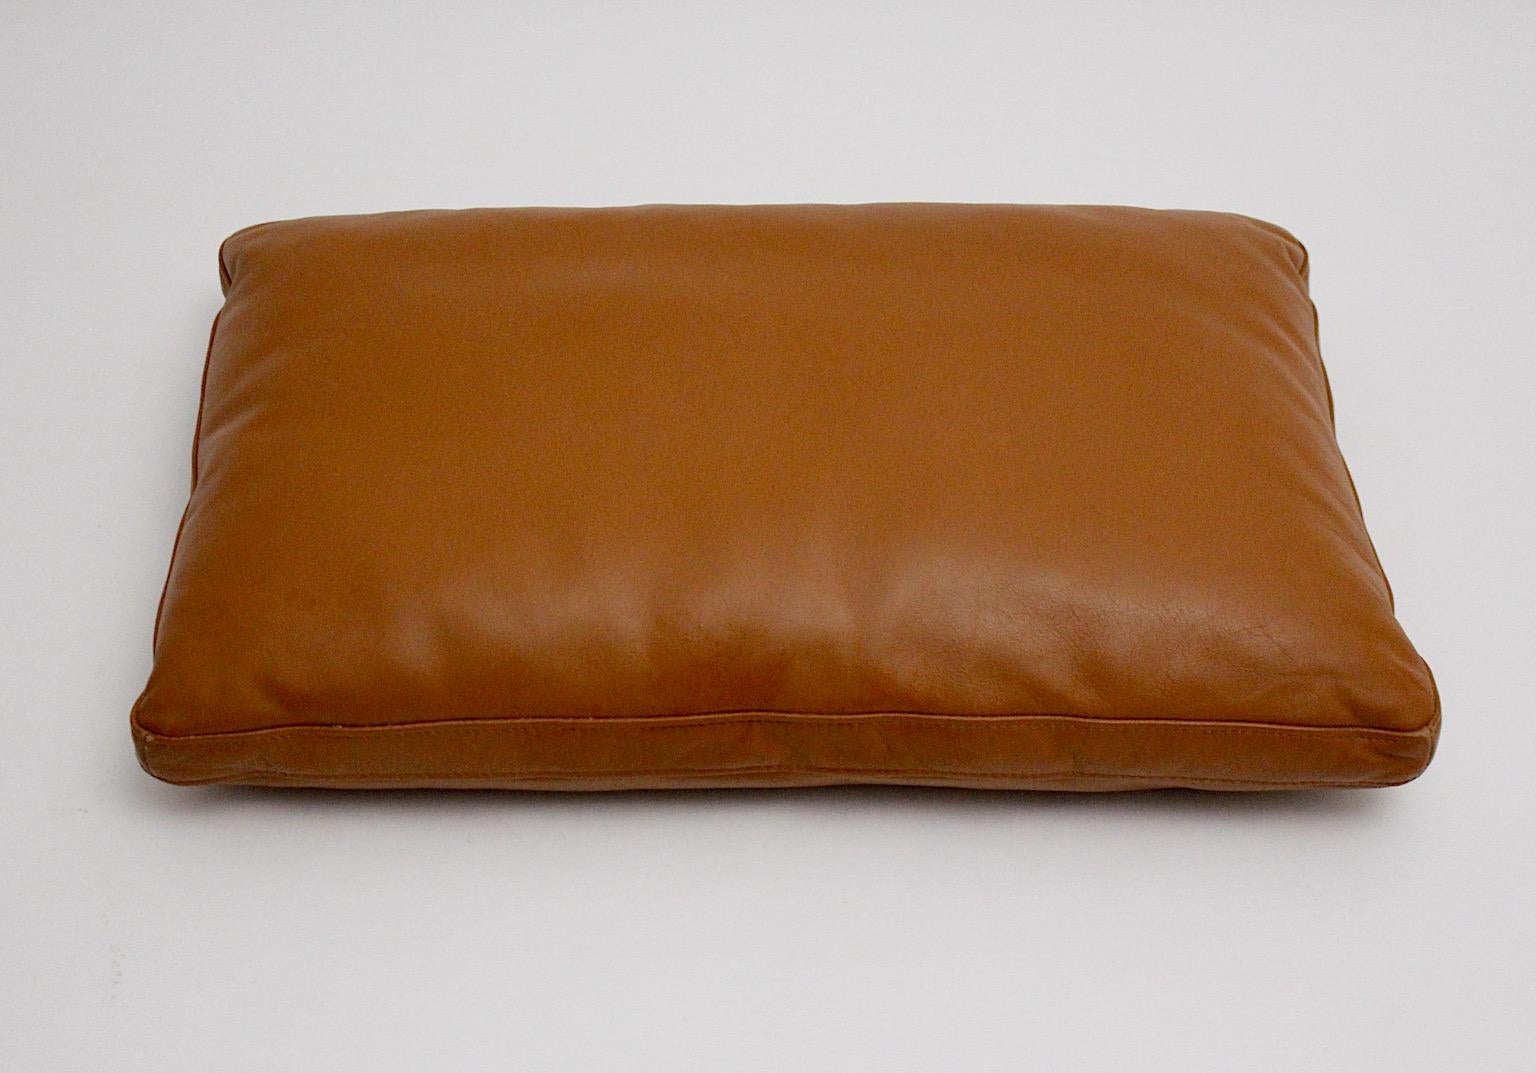 Late 20th Century Brown Cognac Stitched Leather Vintage Three Large Pillows, 1970s, Switzerland For Sale